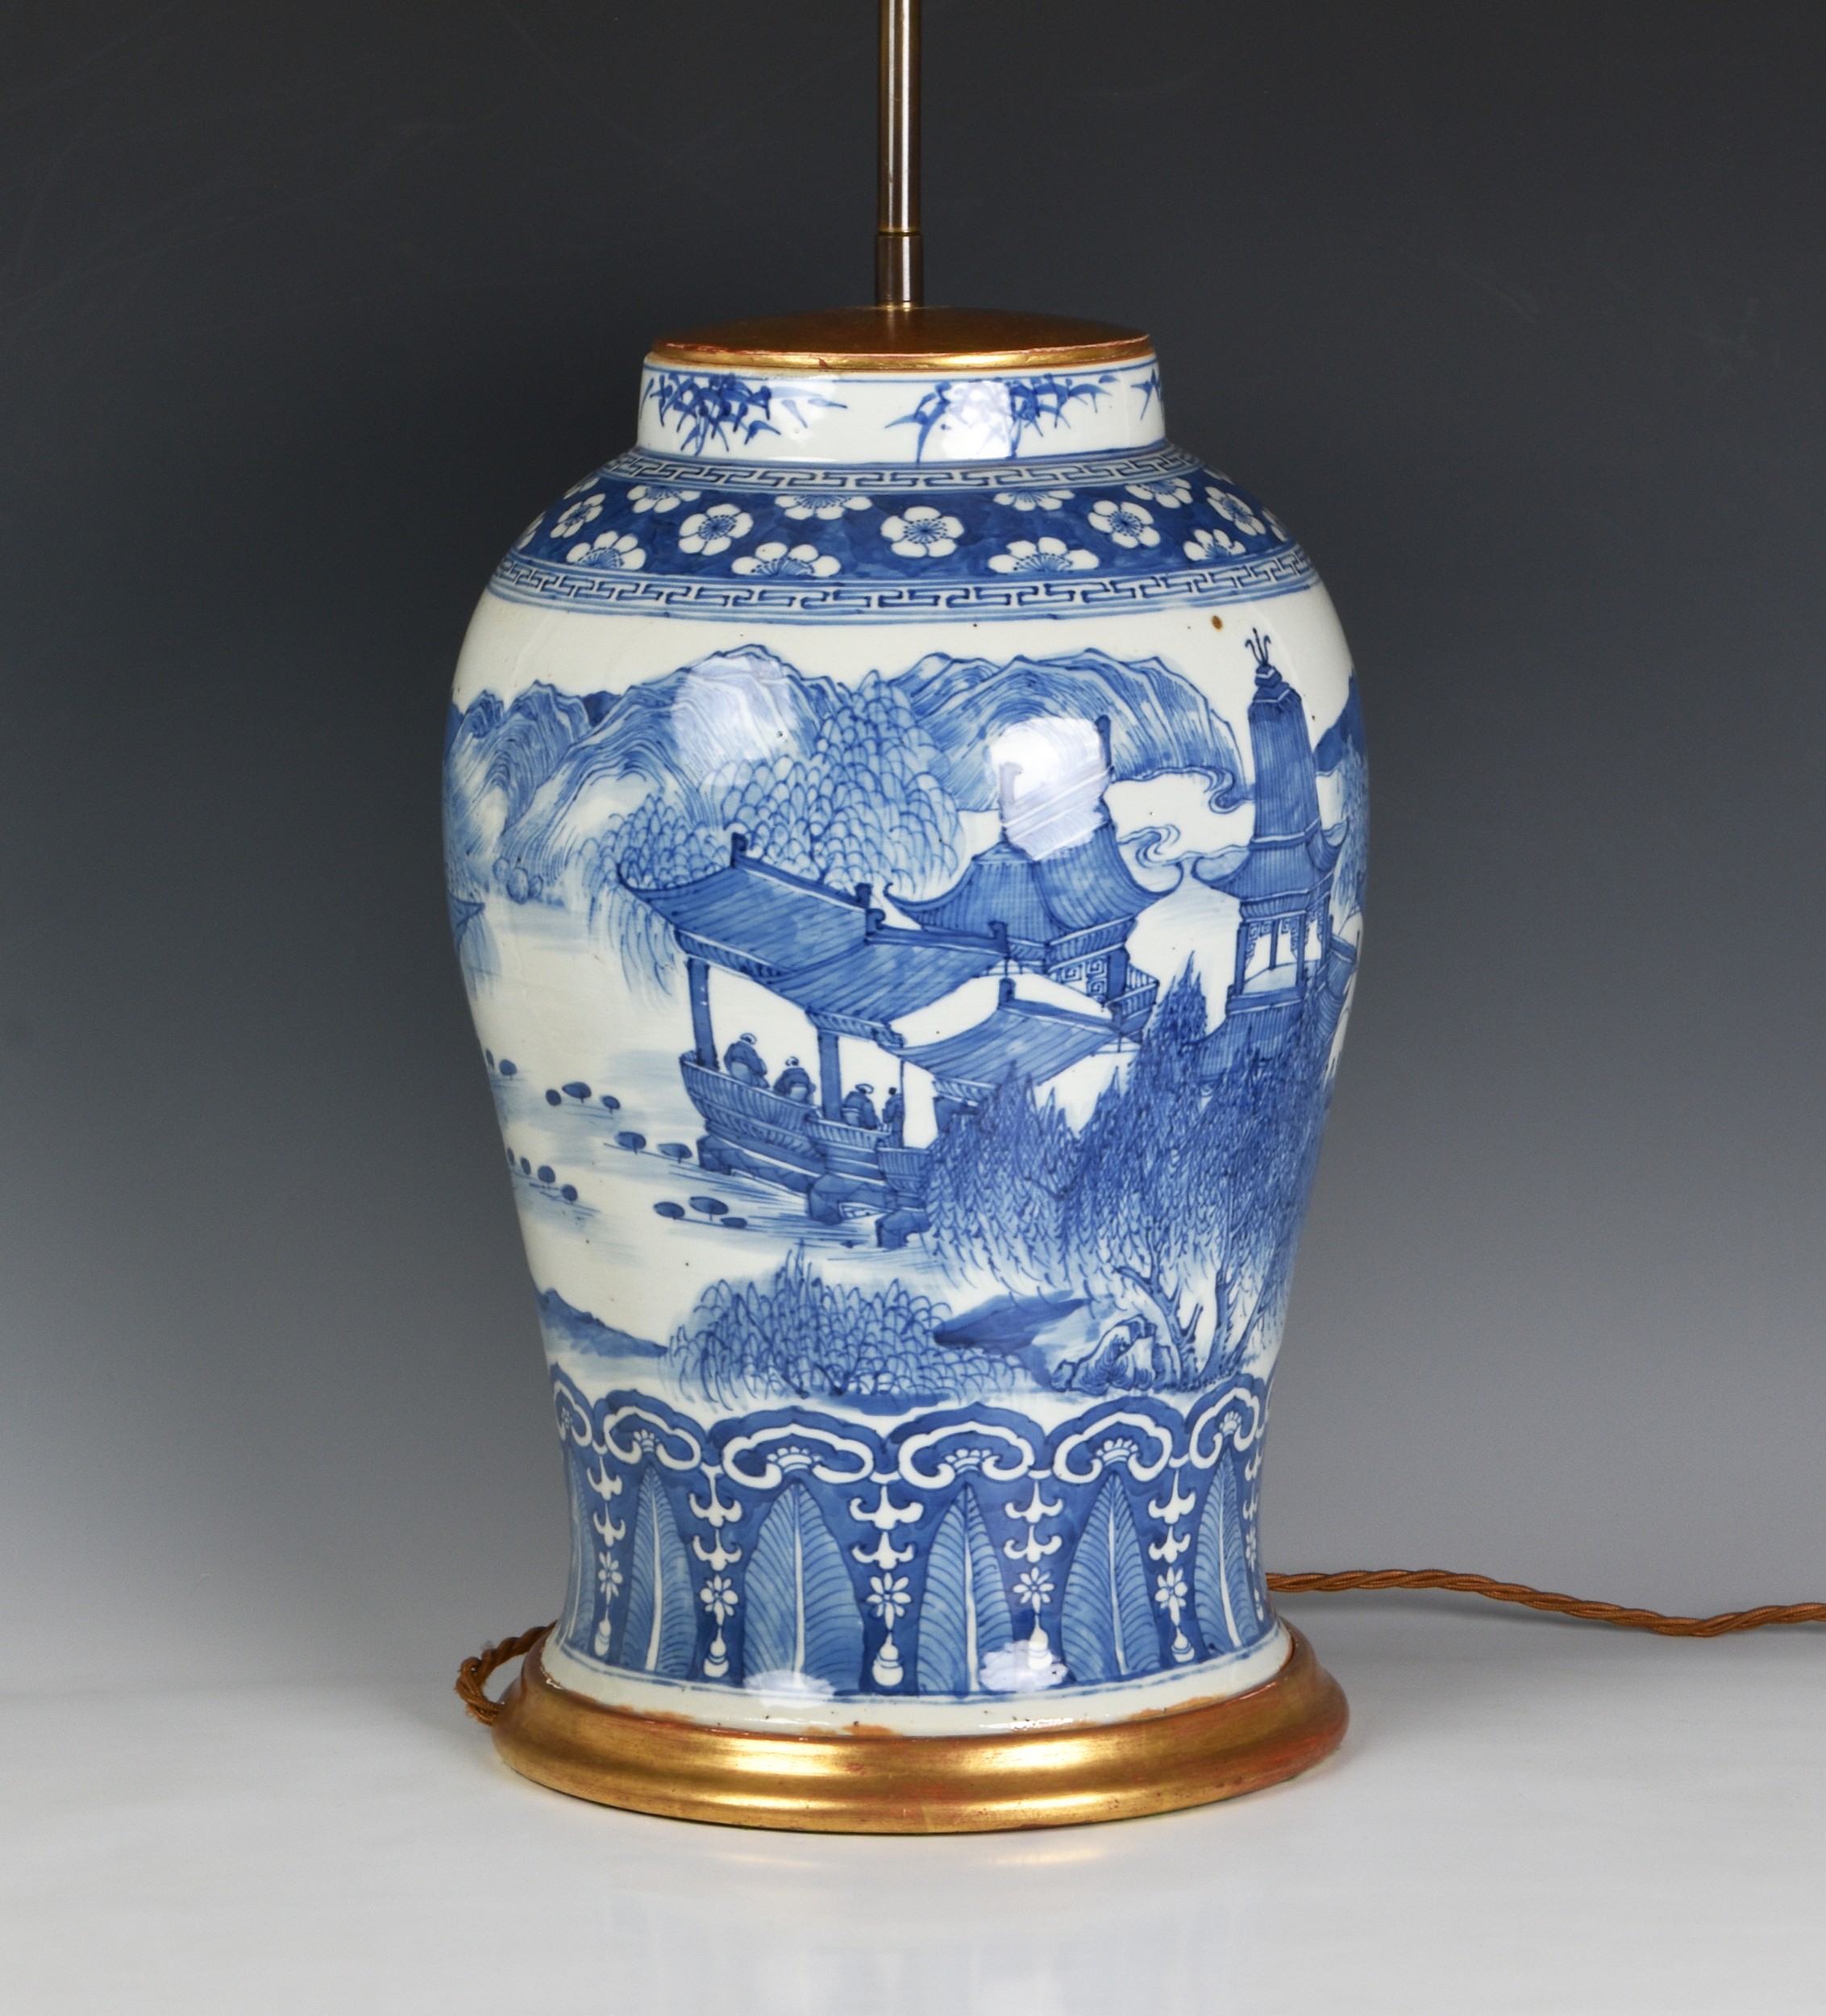 A large Chinese blue and white vase lamp, the vase probably 19th century, of stout baluster form, - Image 4 of 6